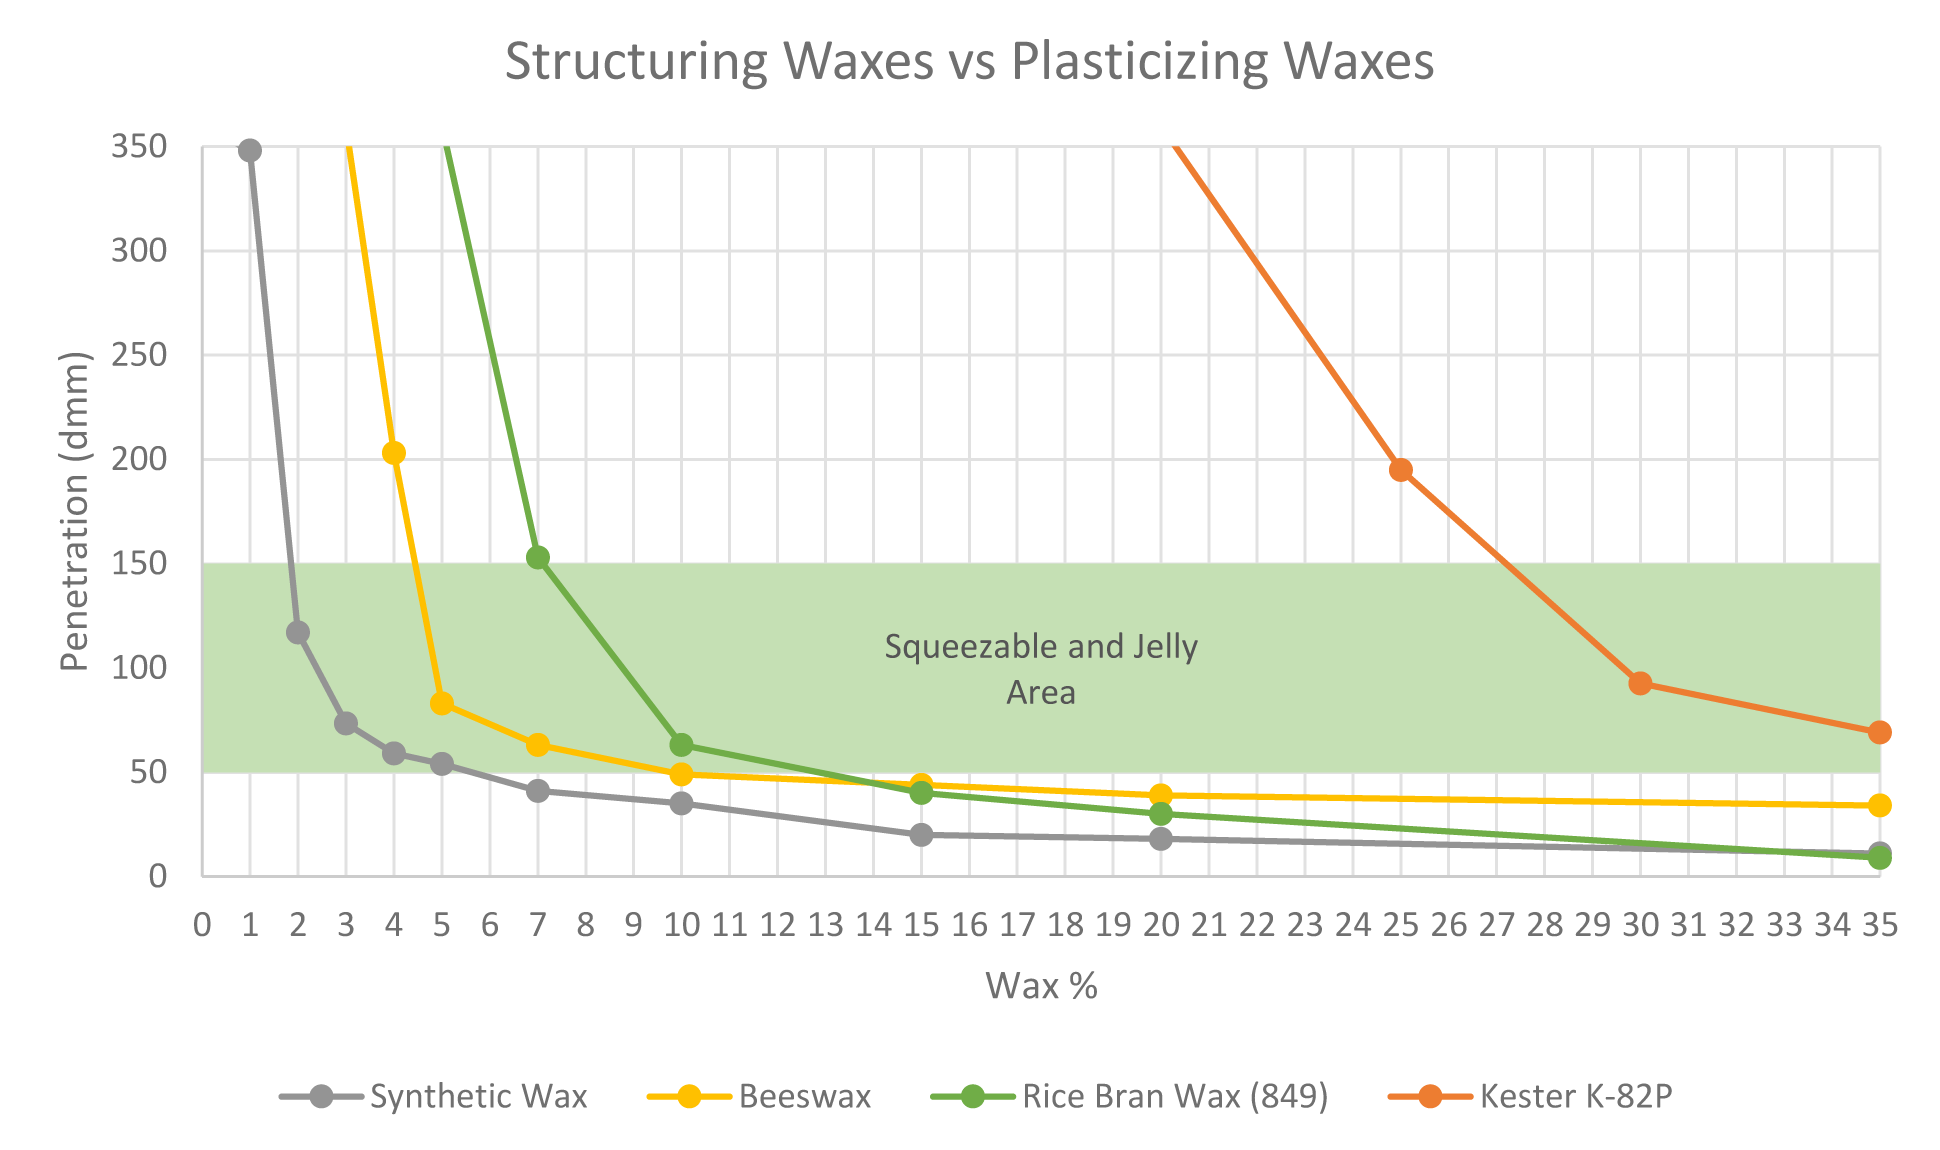 Structuring Waxes vs Plasticizing Waxes